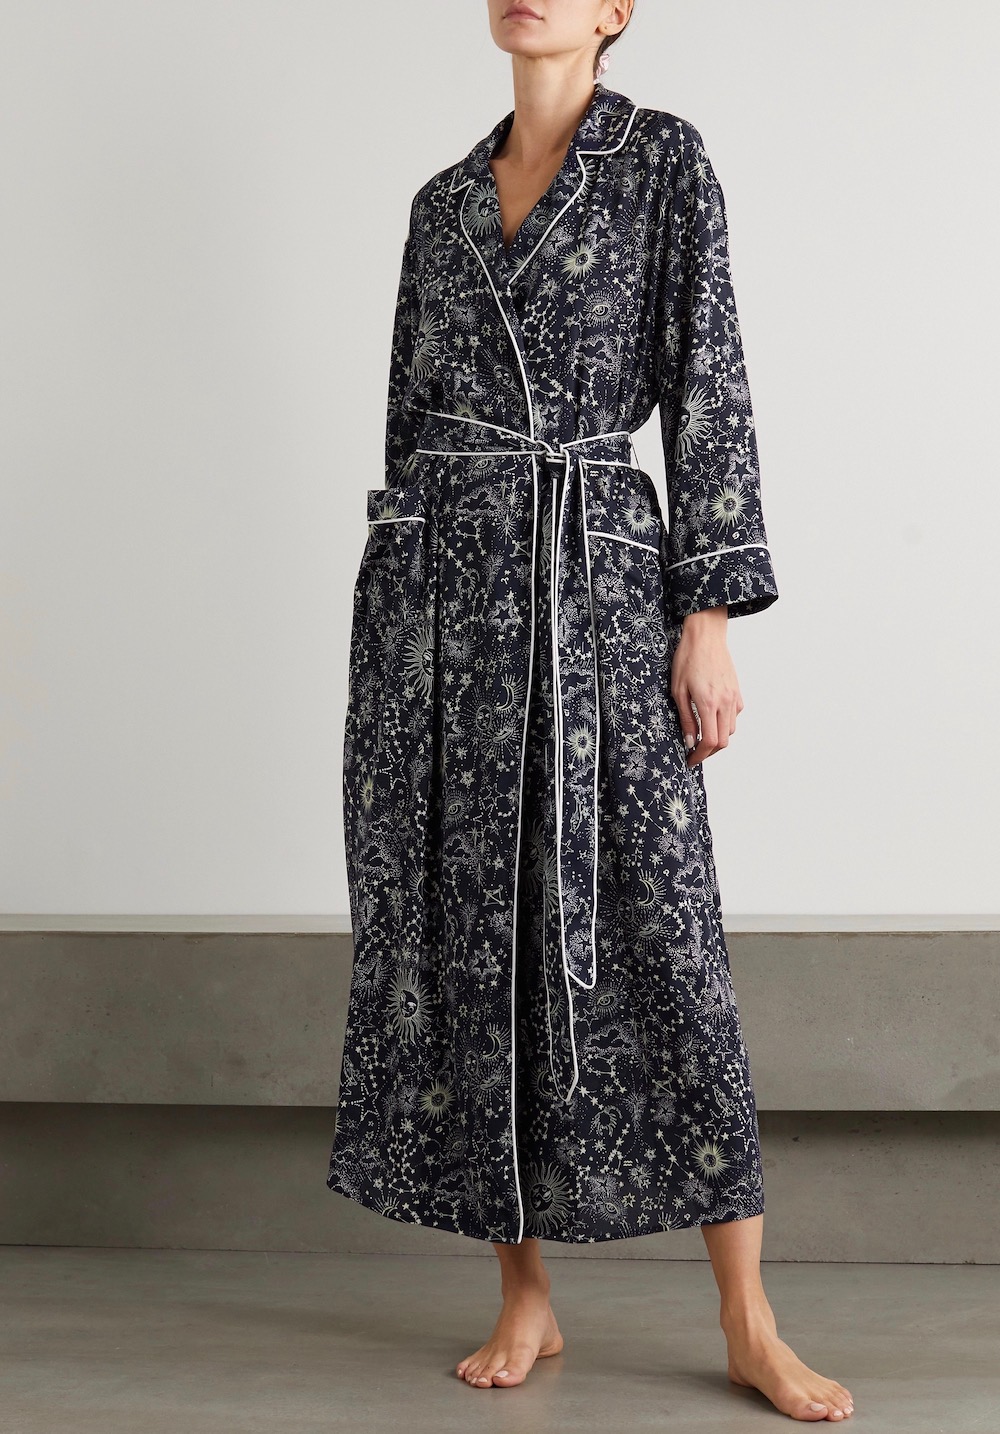 Robes That Have Winter Written All Over Them - theFashionSpot